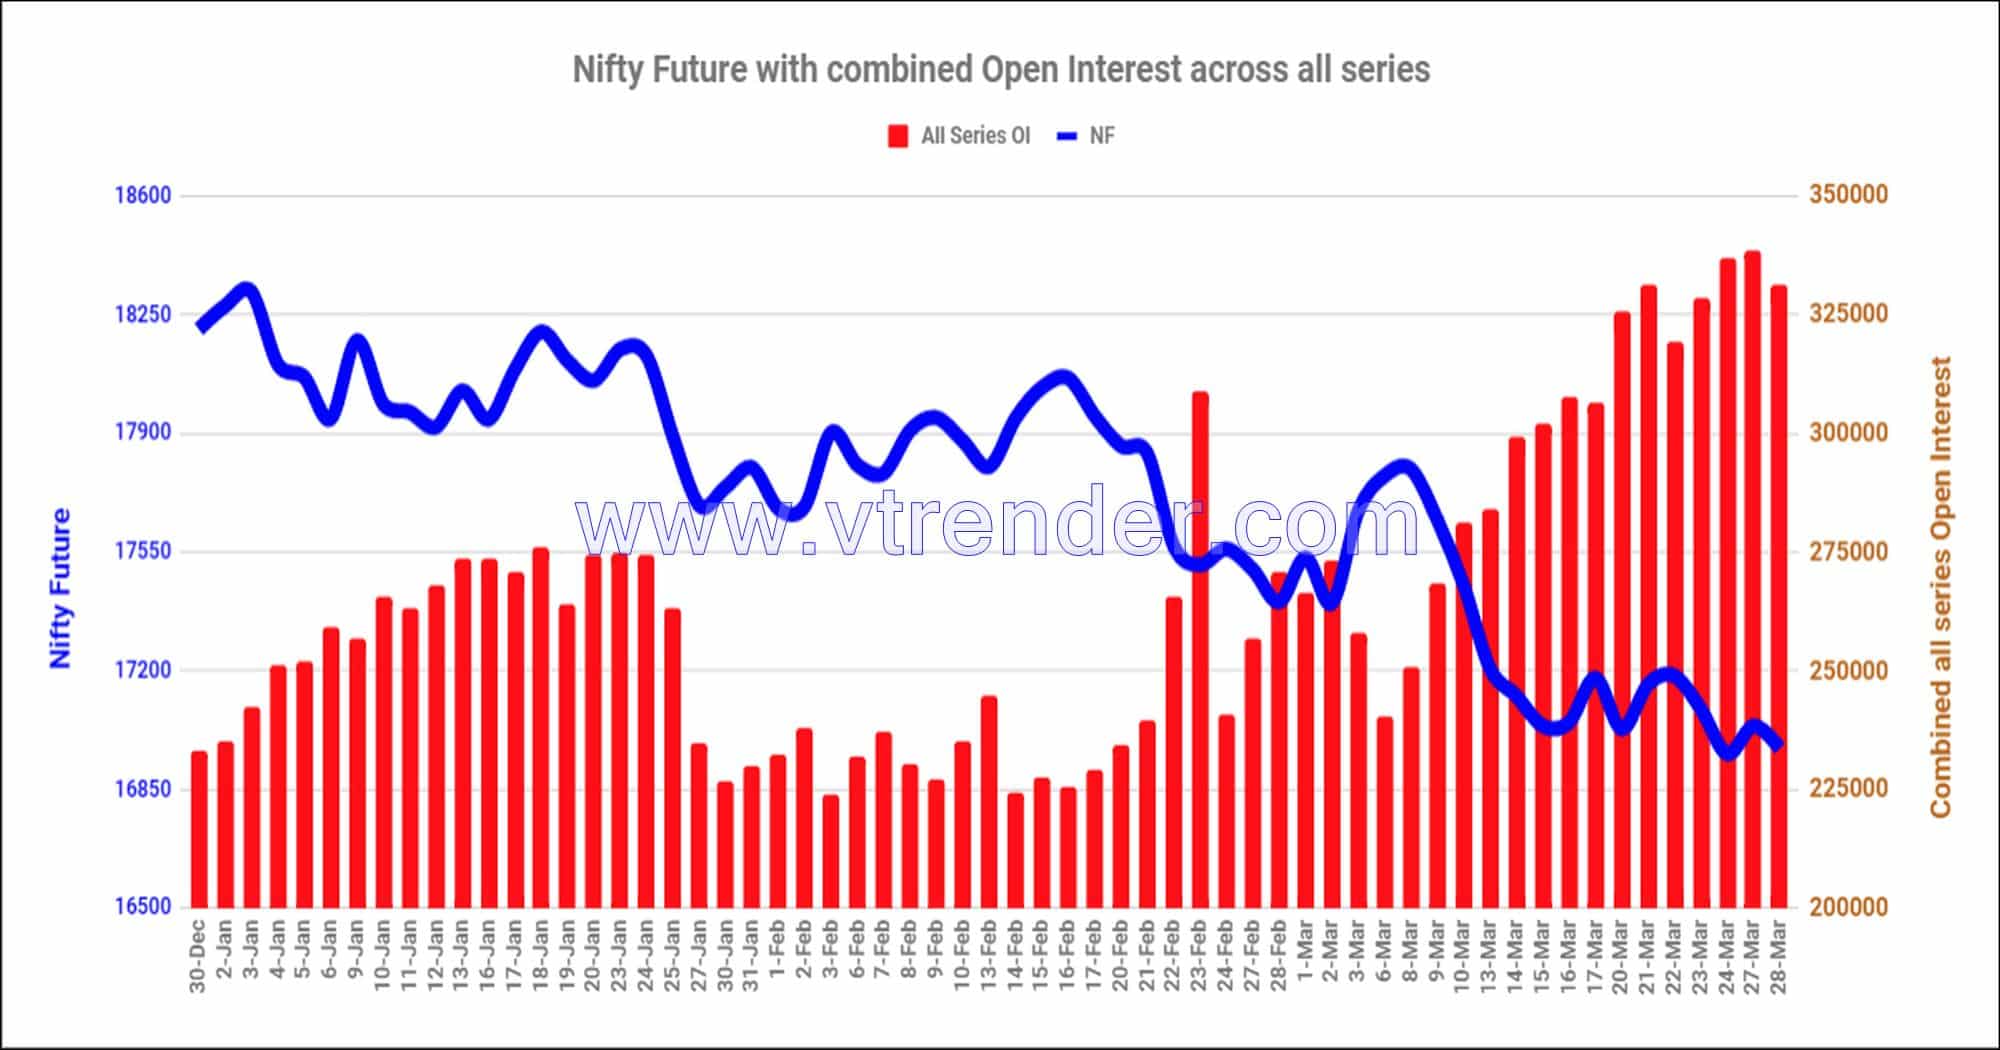 Nf28Mar Nifty And Banknifty Futures With All Series Combined Open Interest – 28Th Mar 2023 Banknifty, Nifty, Open Interest